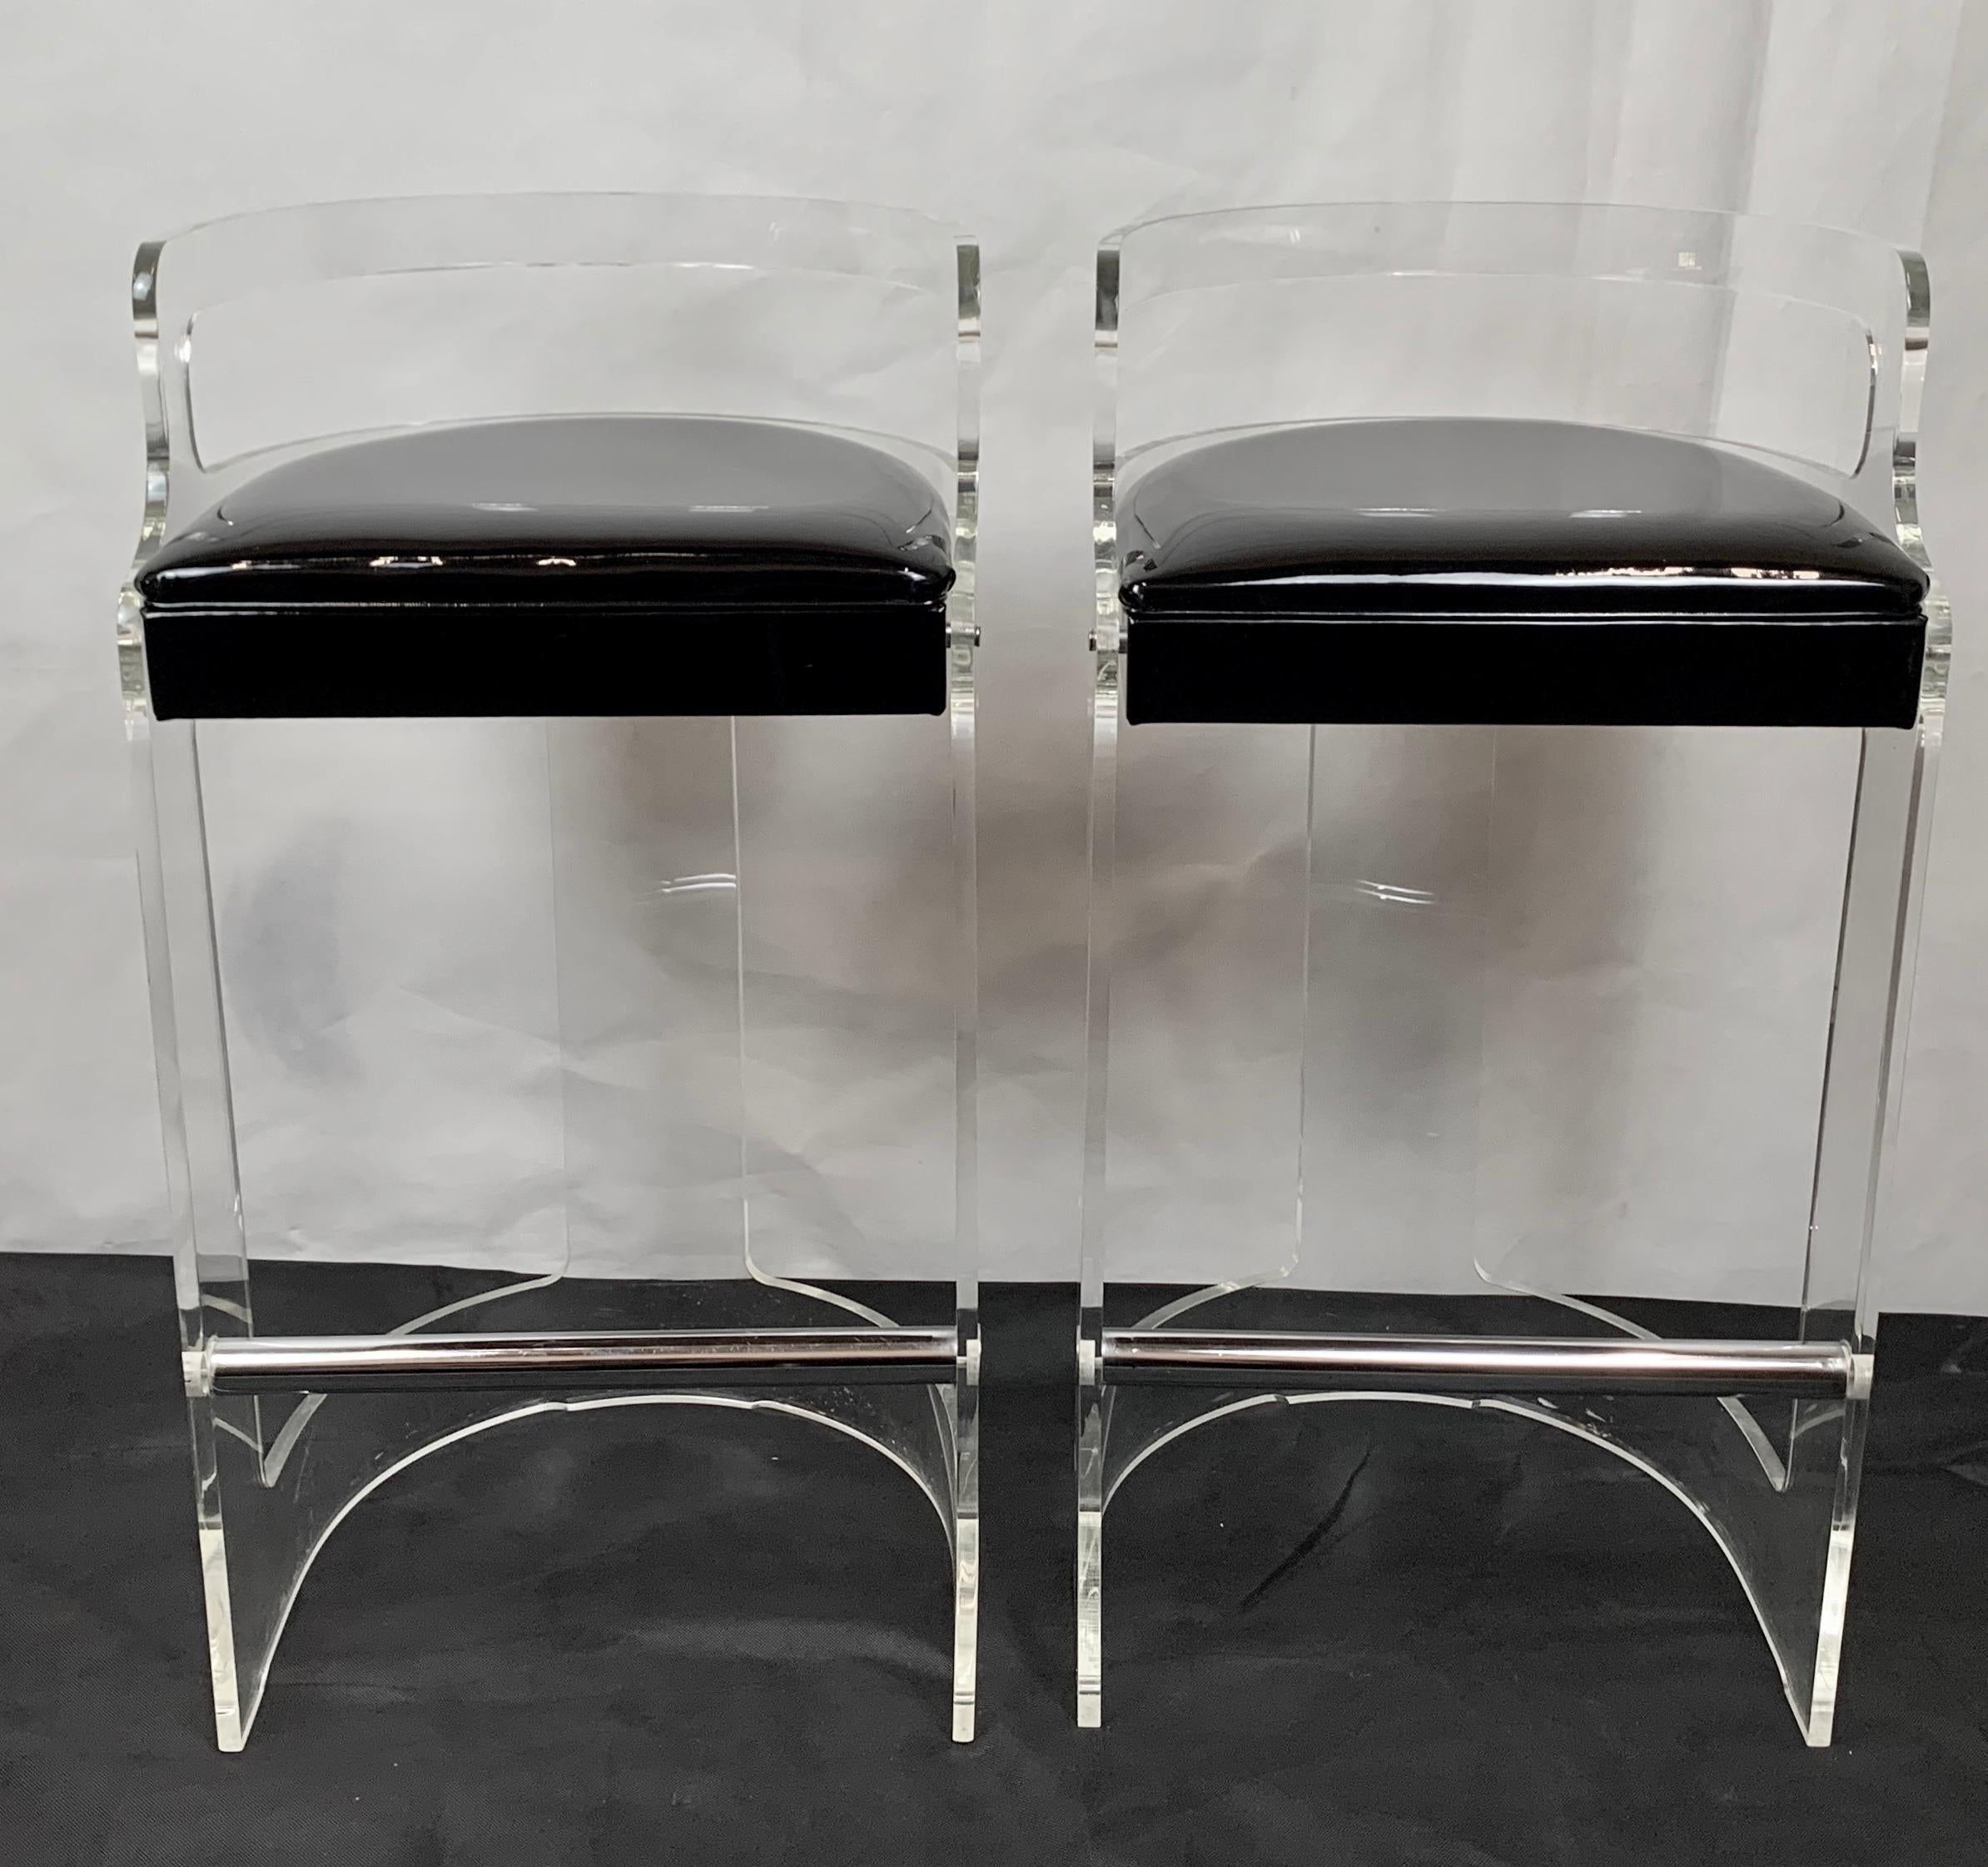 Pair of Lucite and chrome barstools designed by Charles Hollis Jones in the 1970s and produced by Hill Manufacturing. The barstools have the original black patent seat upholstery. The footrest is chrome, as well as, the chrome studs that hold the